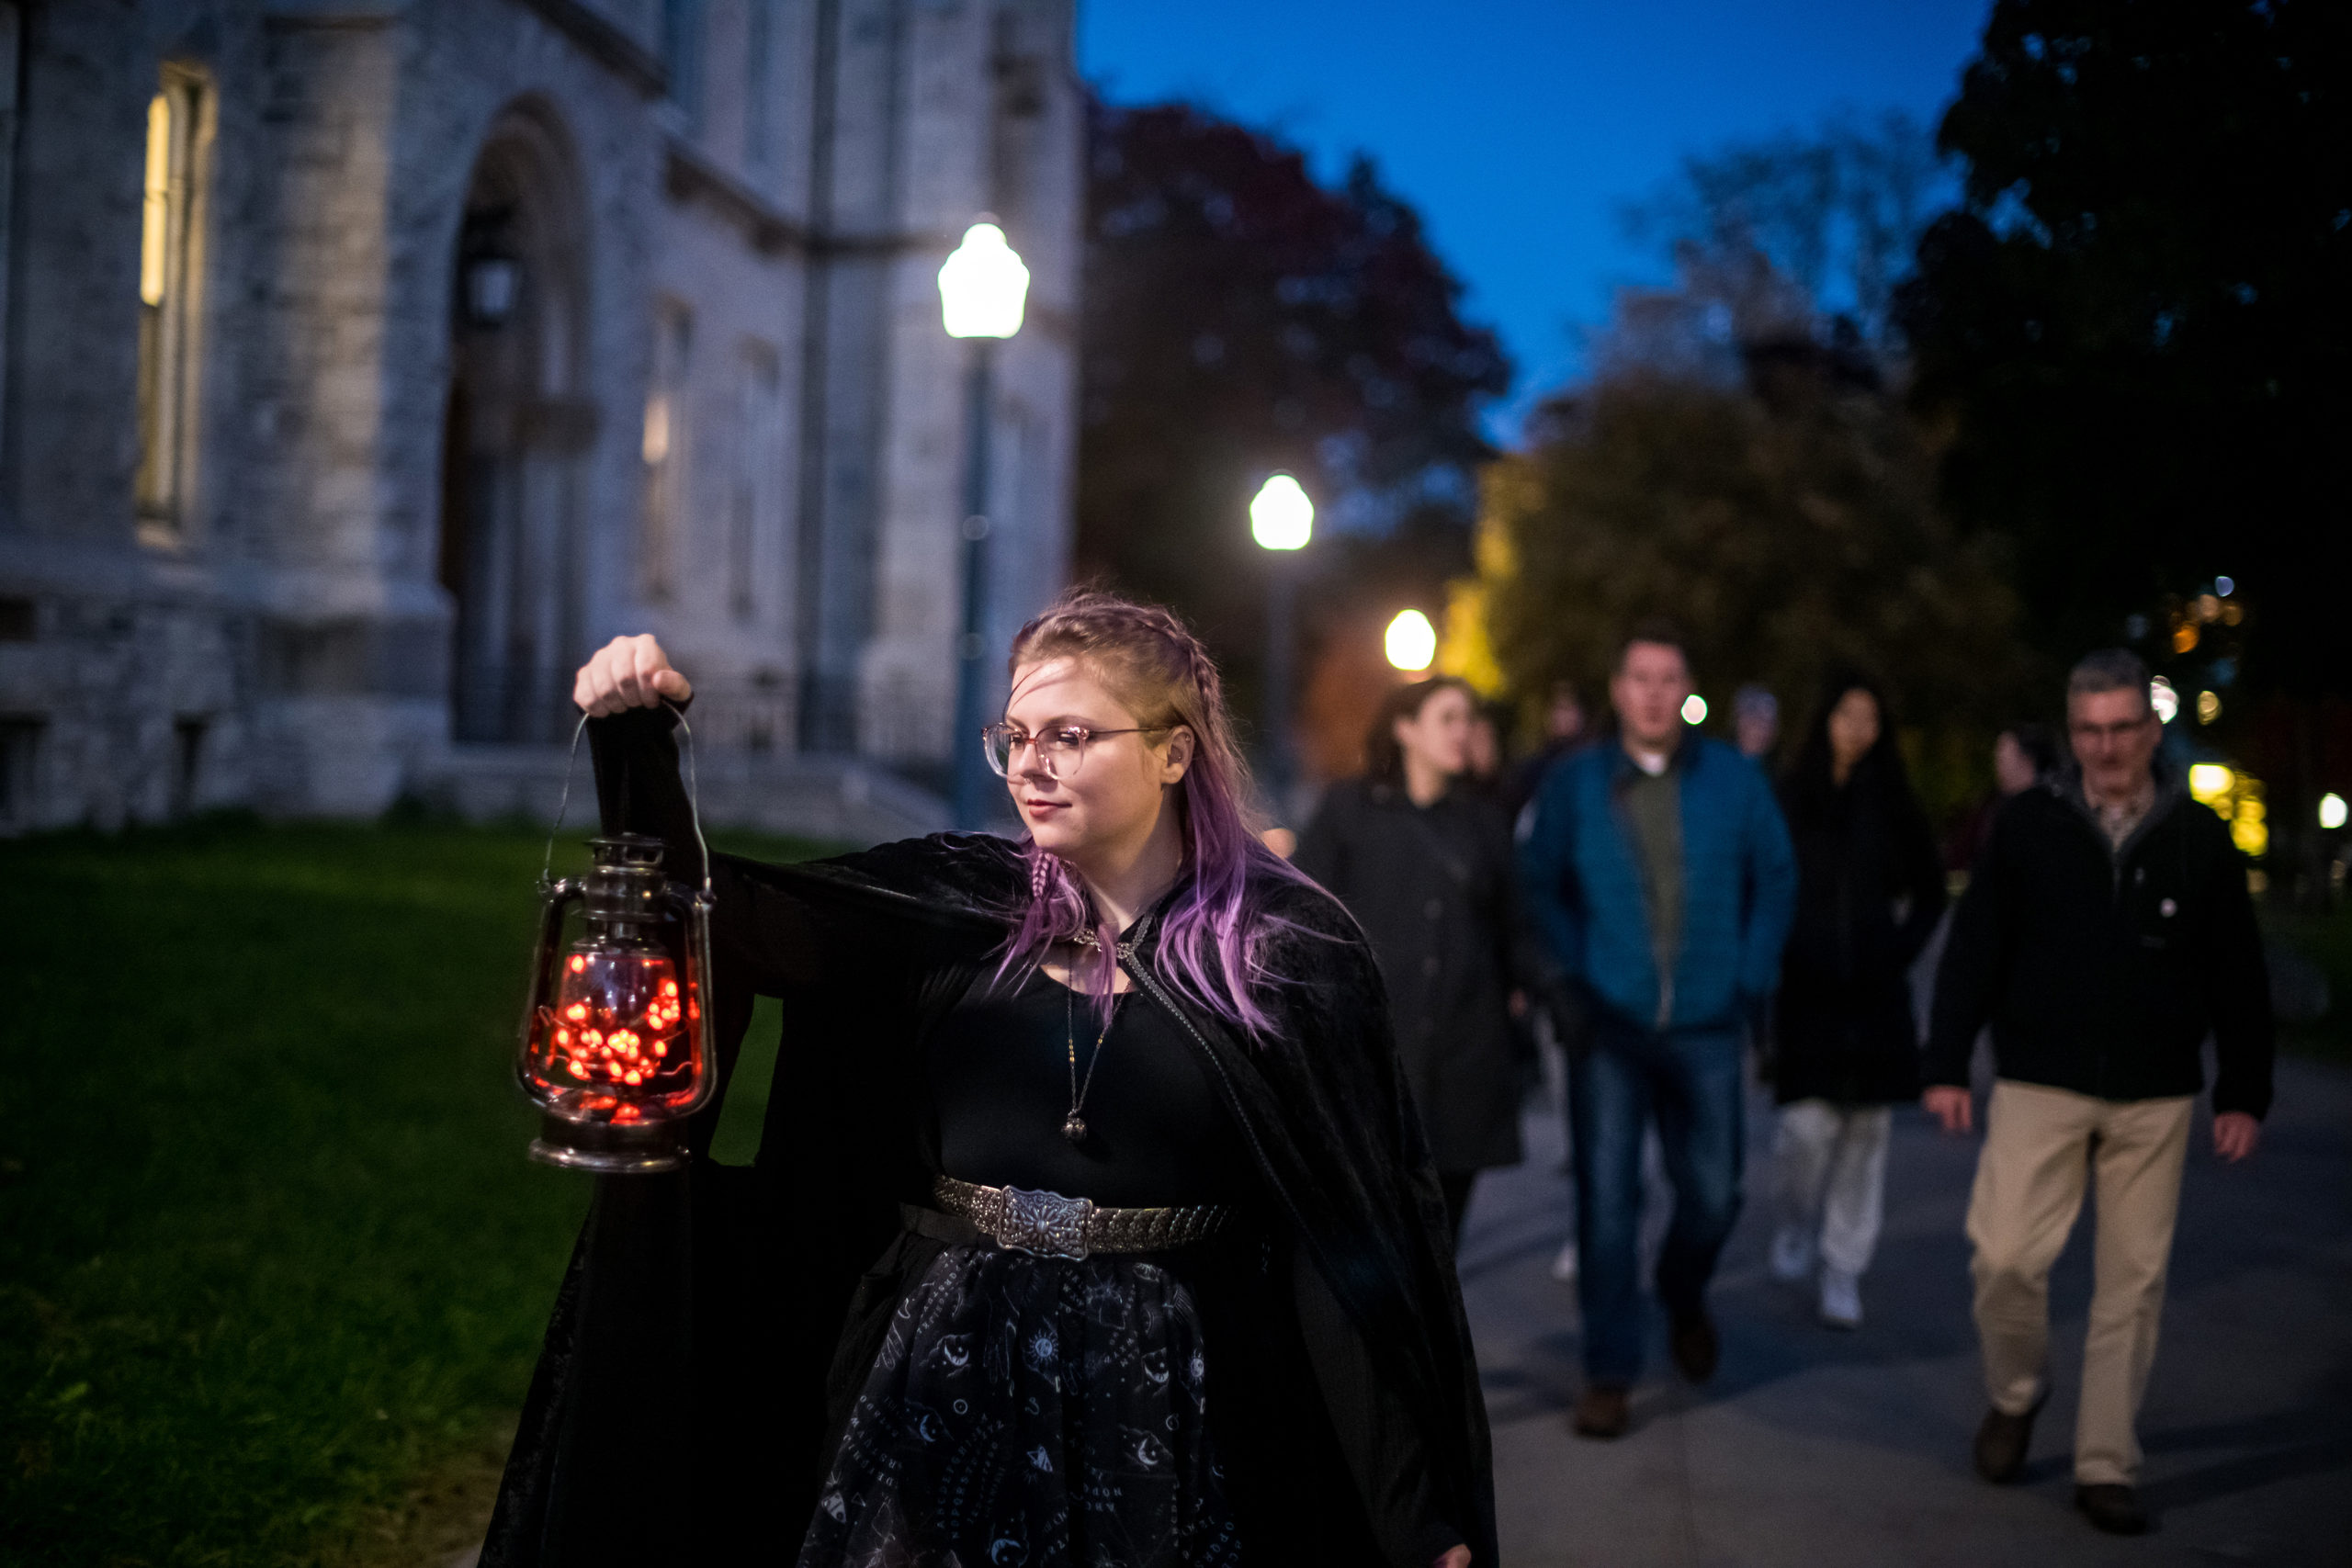 Haunted Walk guide holding a lantern guiding people